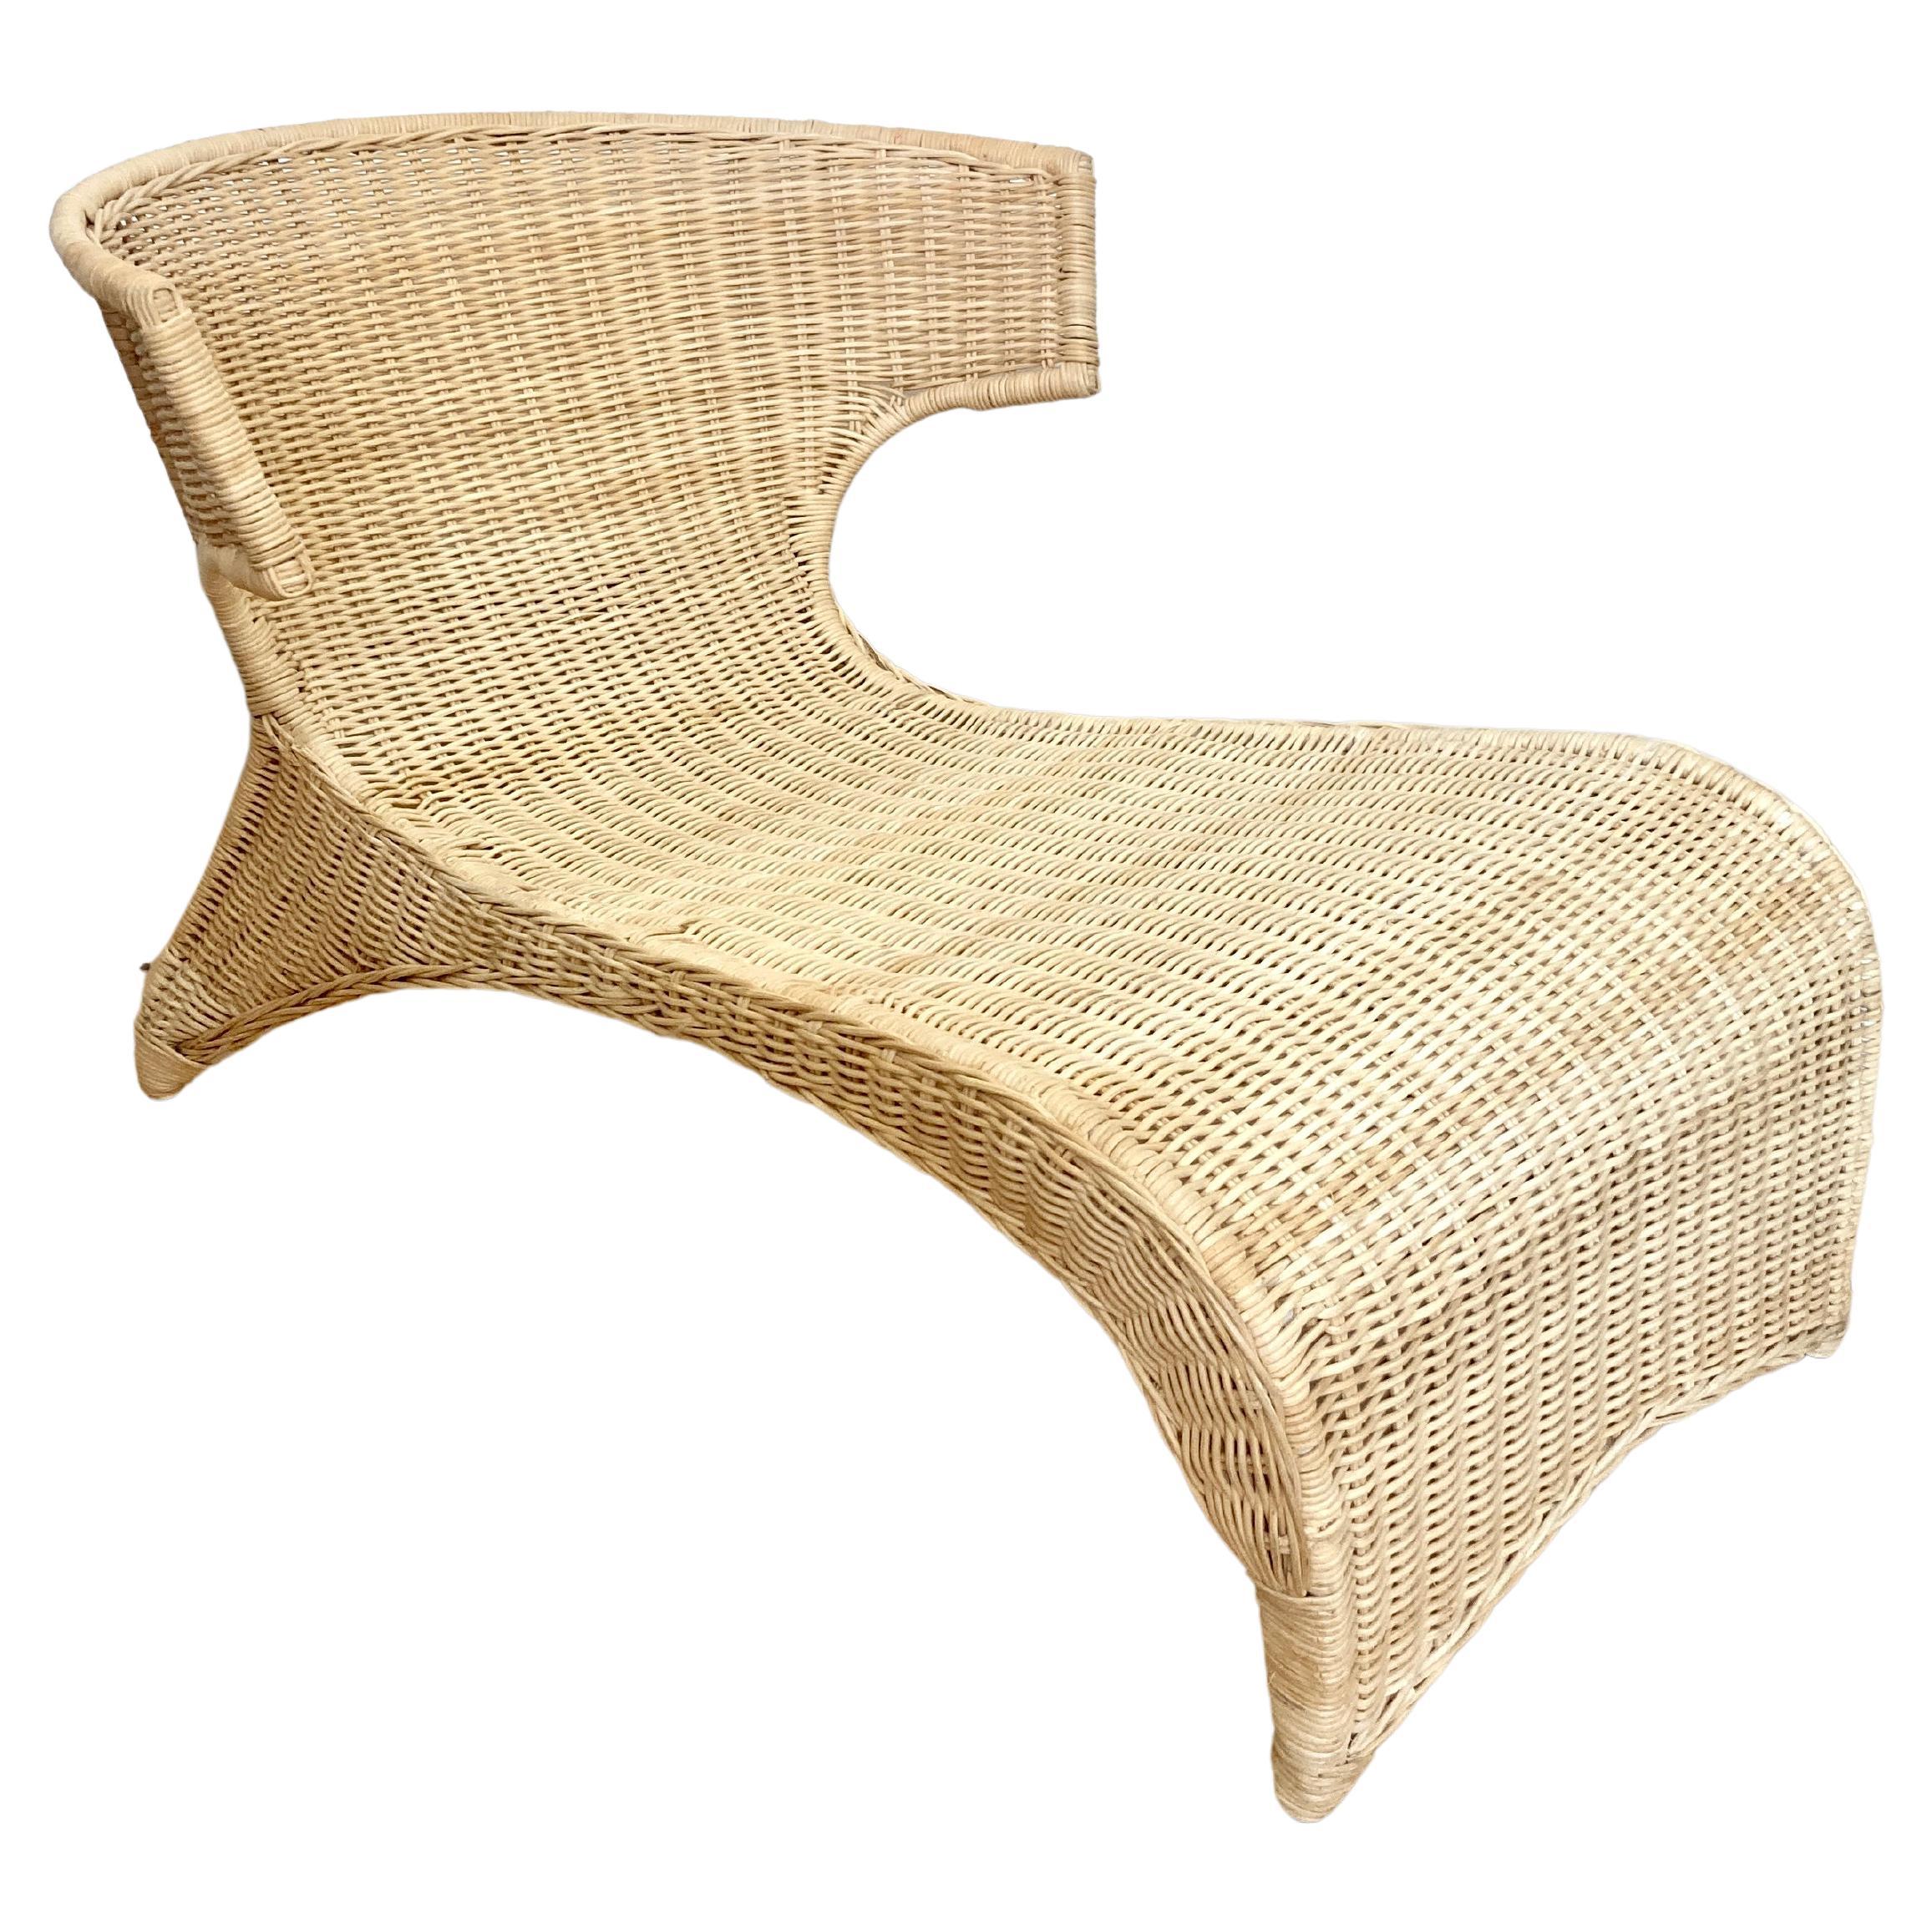 Low Lounge Chair / Chaise Longue by Monika Mulder for Ikea Savo Natural Rattan